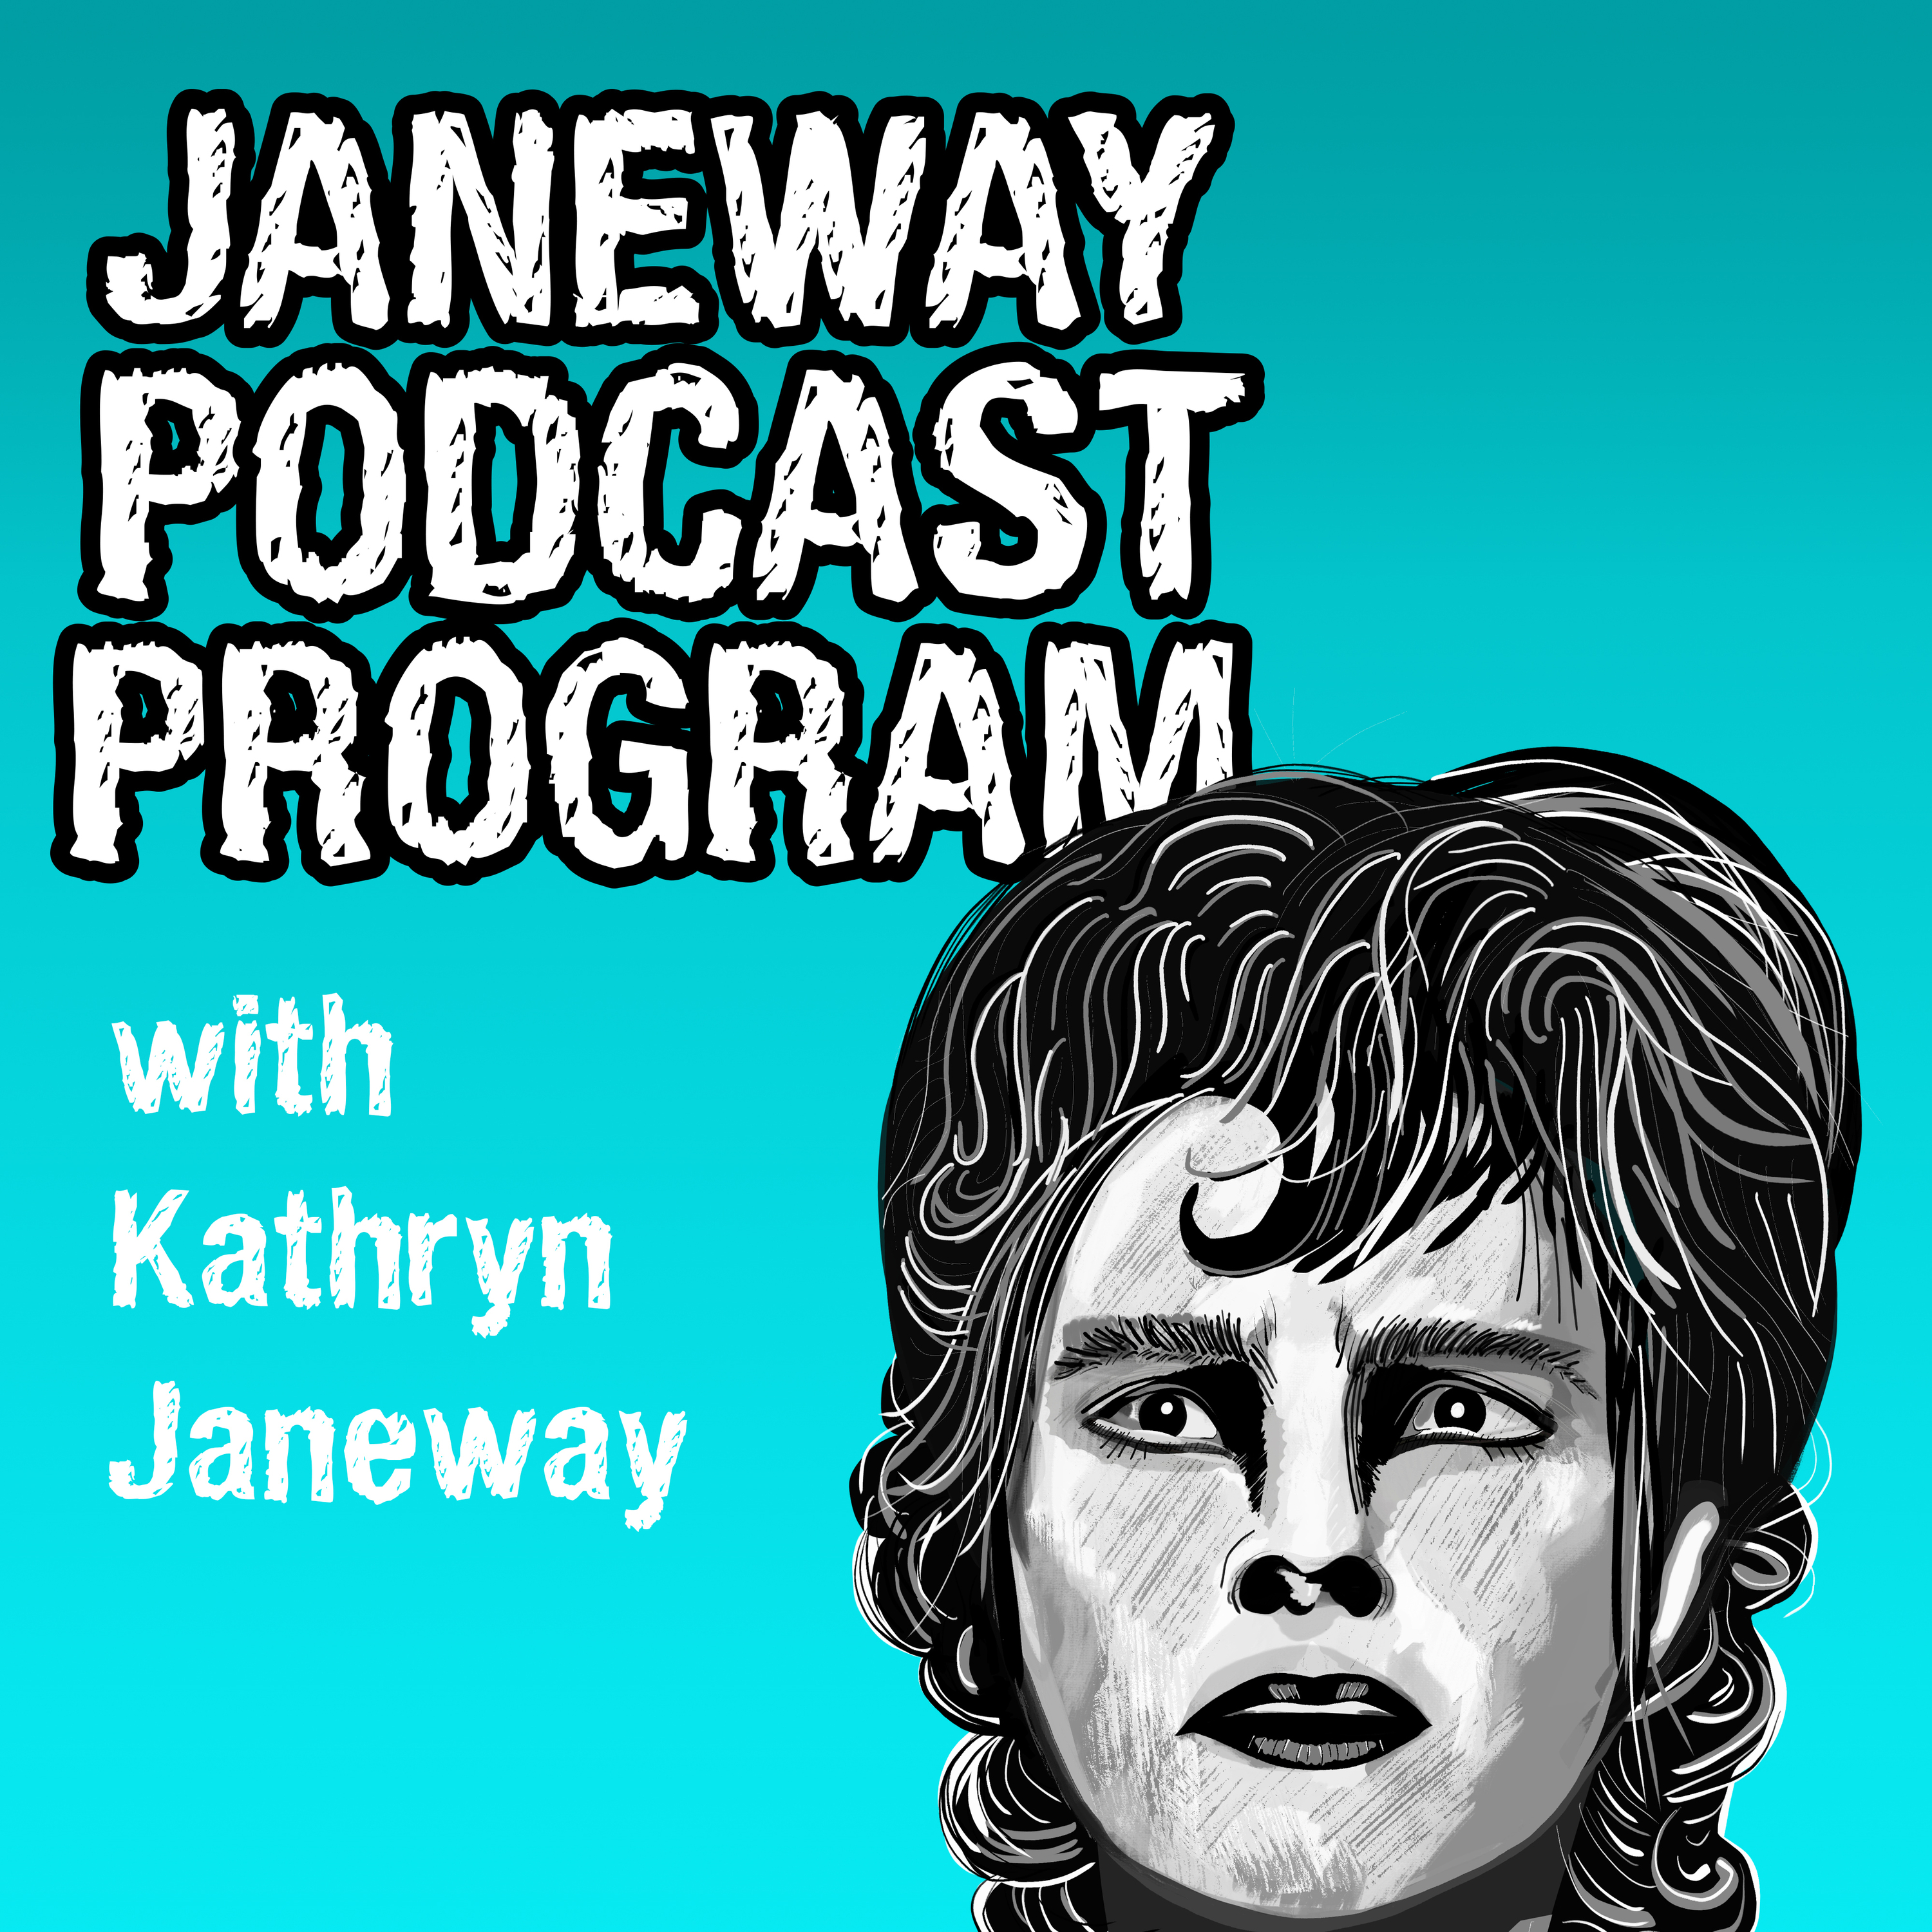 THE JANEWAY PODCAST PROGRAM | After 